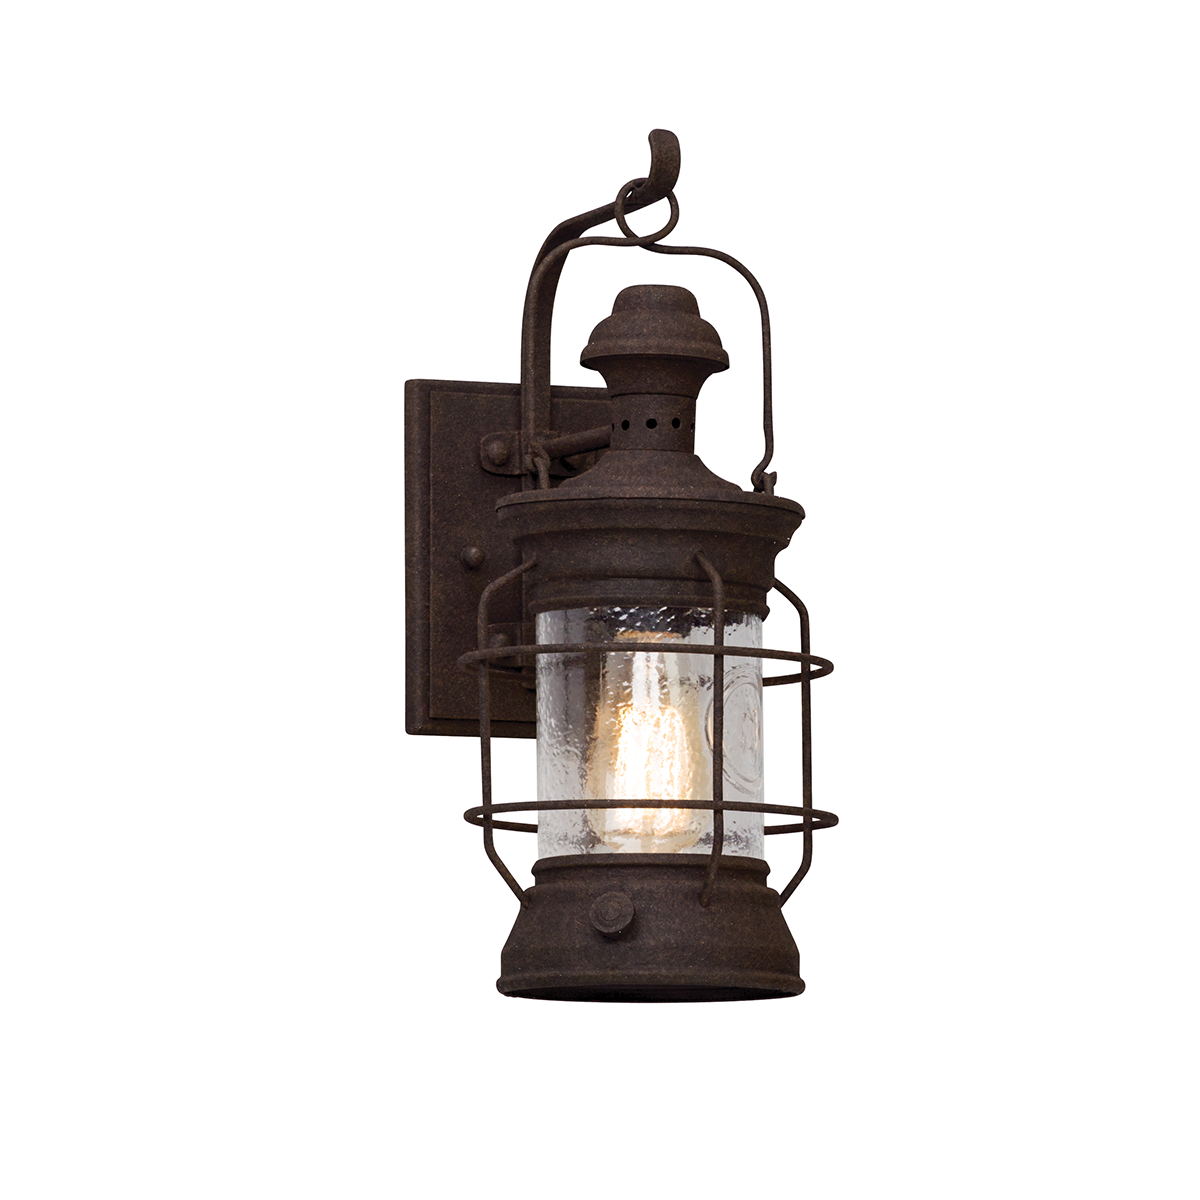 Troy Lighting Atkins Wall Sconce Wall Sconce Troy Lighting HERITAGE BRONZE 6.75x6.75x15.5 